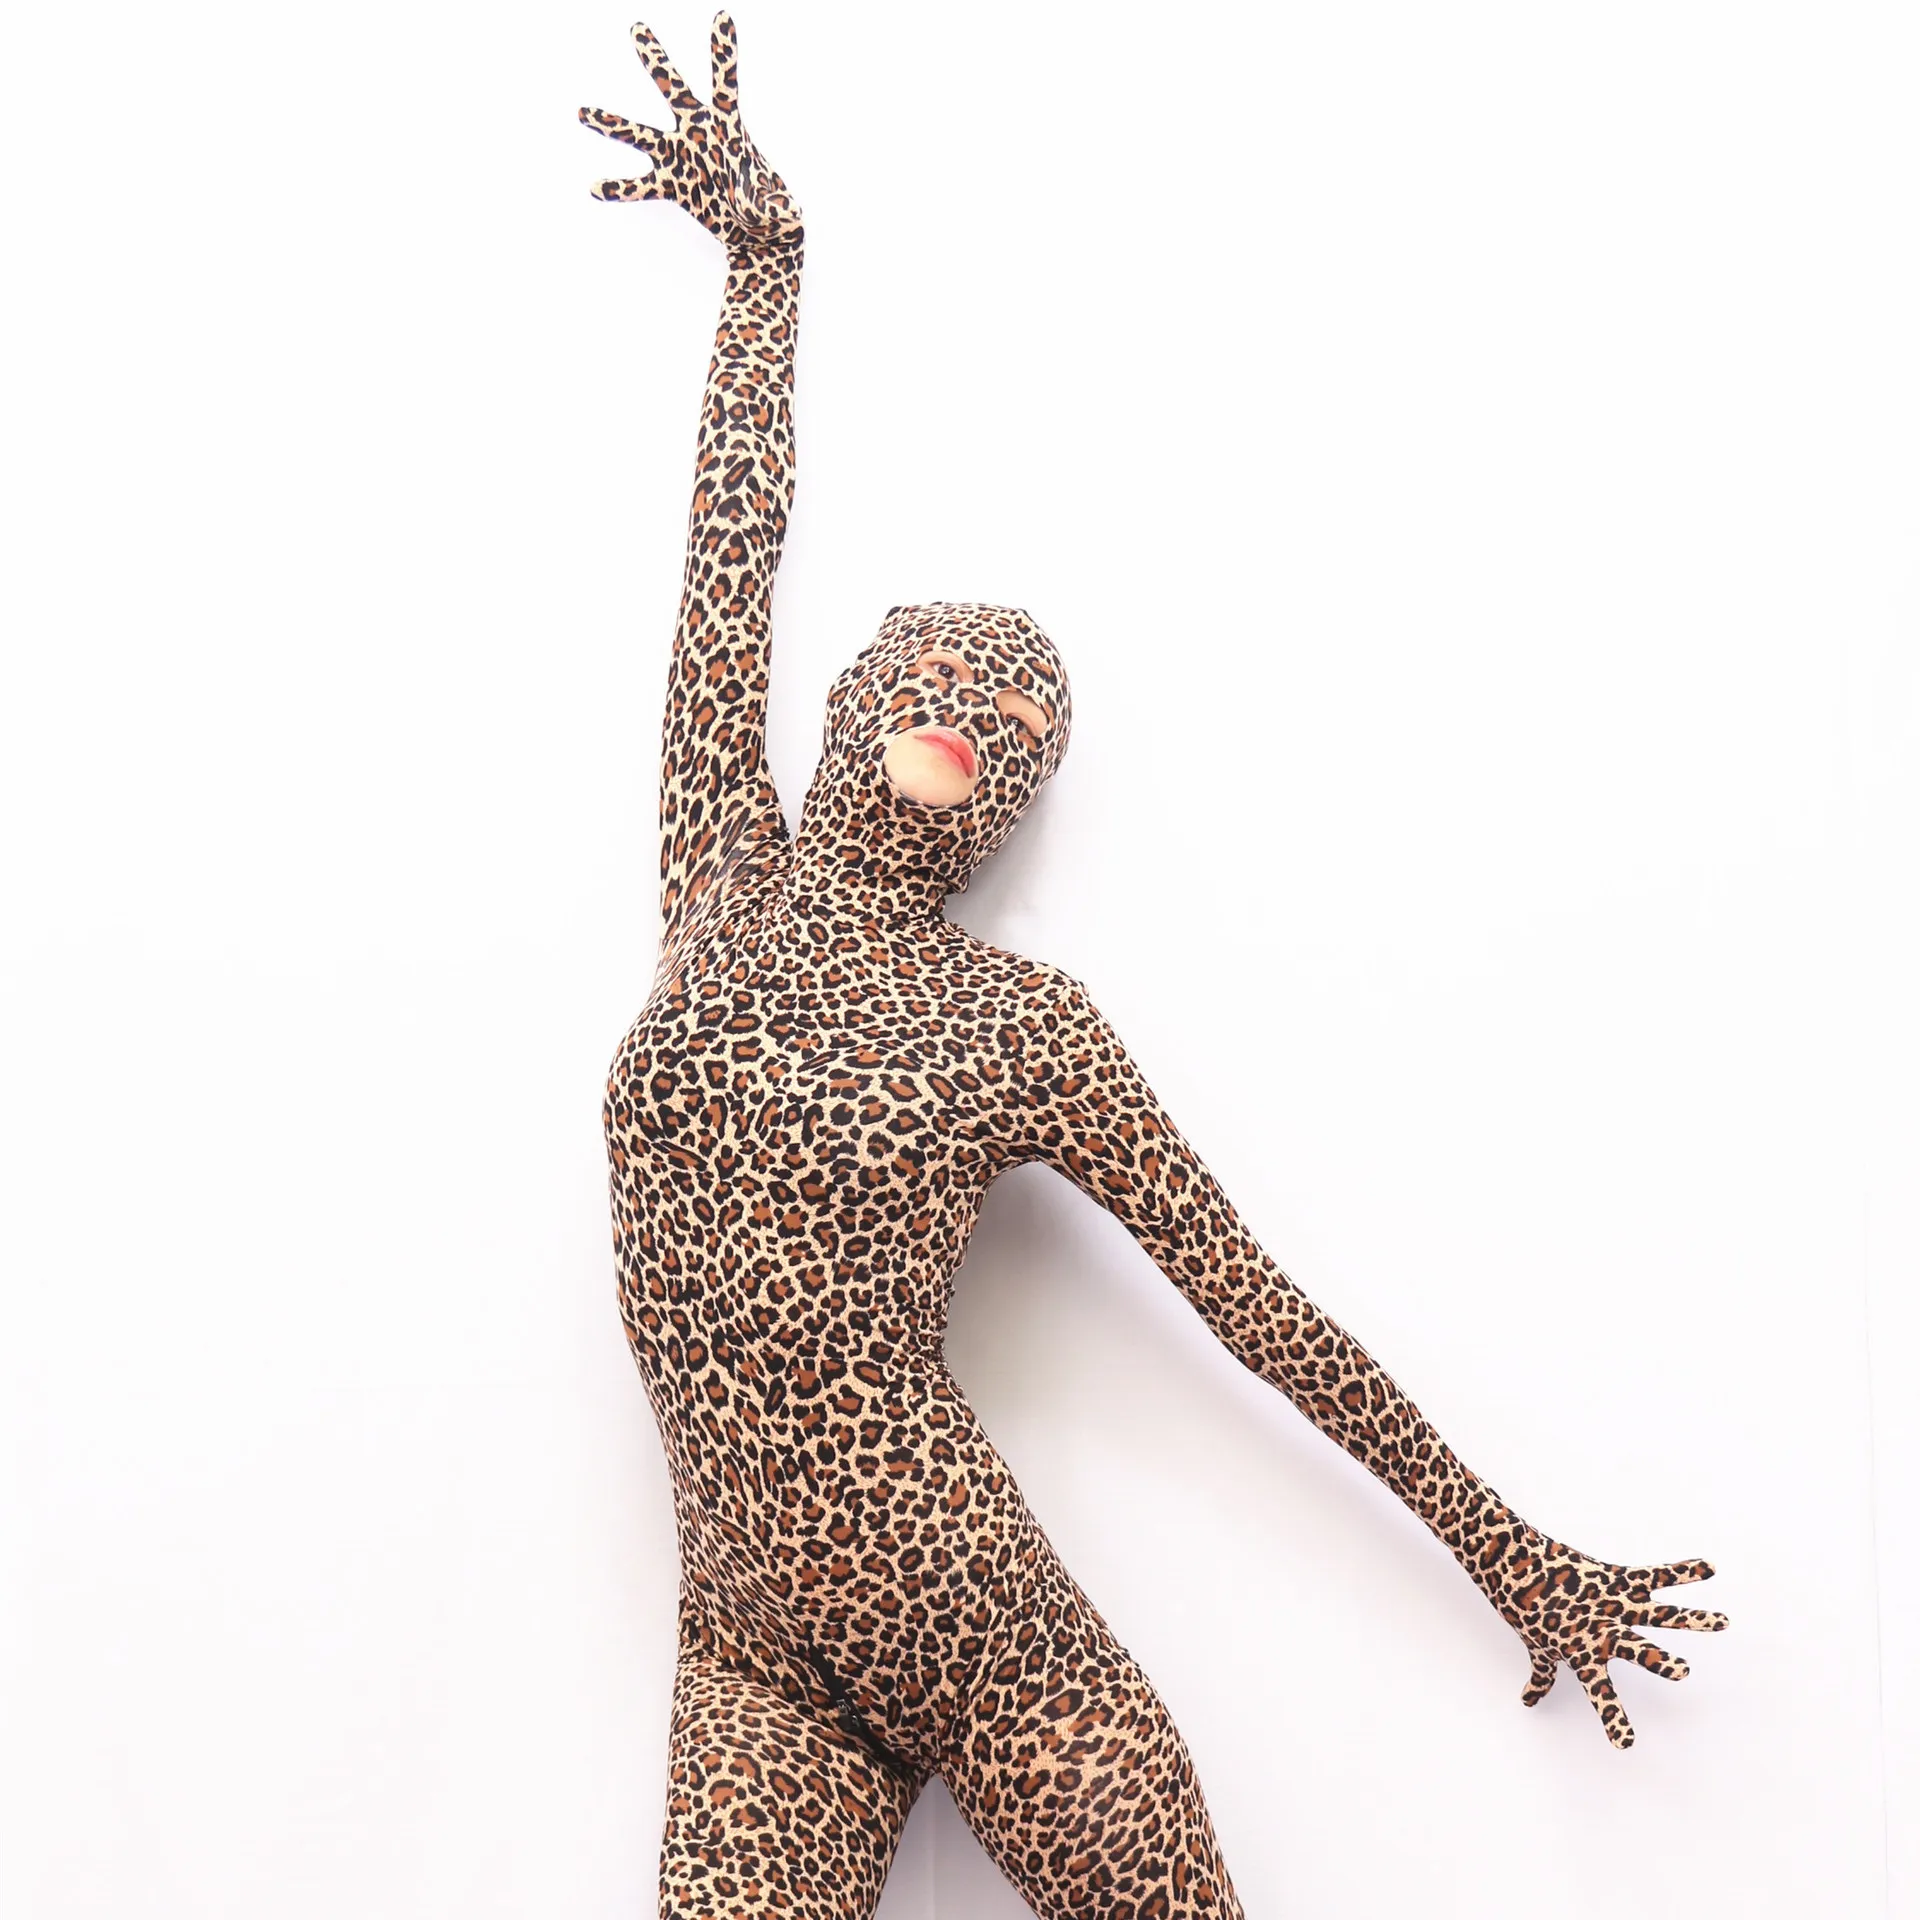 Leopard Print Shapewear Full Coat Appeal Clothing Cosplay One Piece Tight Zentai Zip Open Crotch Bodysuit Catsuit Stage Costumes images - 6